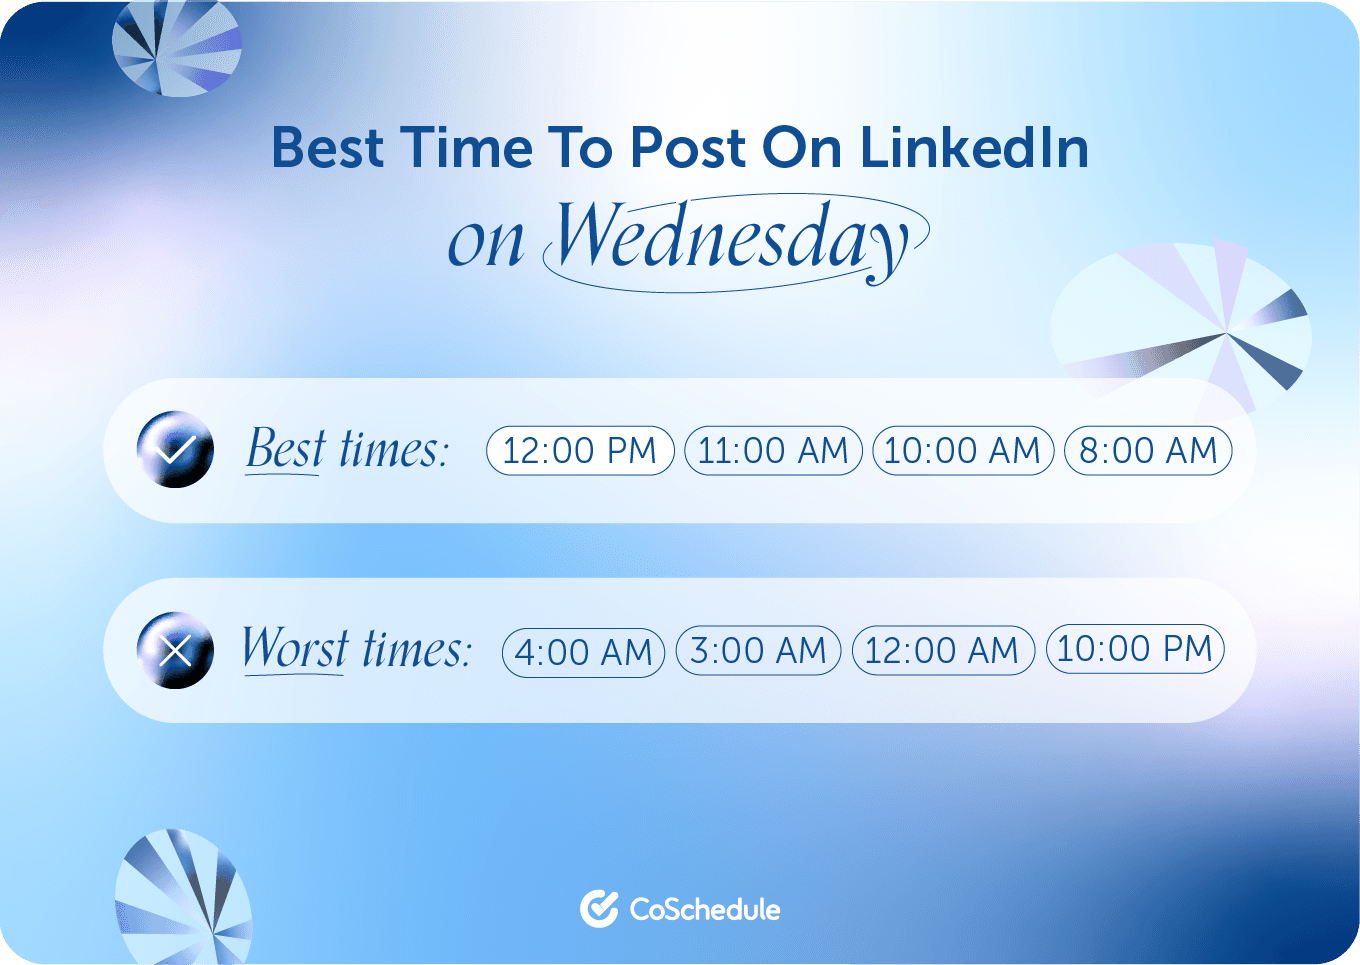 CoSchedule graphic on the best times to post on LinkedIn Wednesday